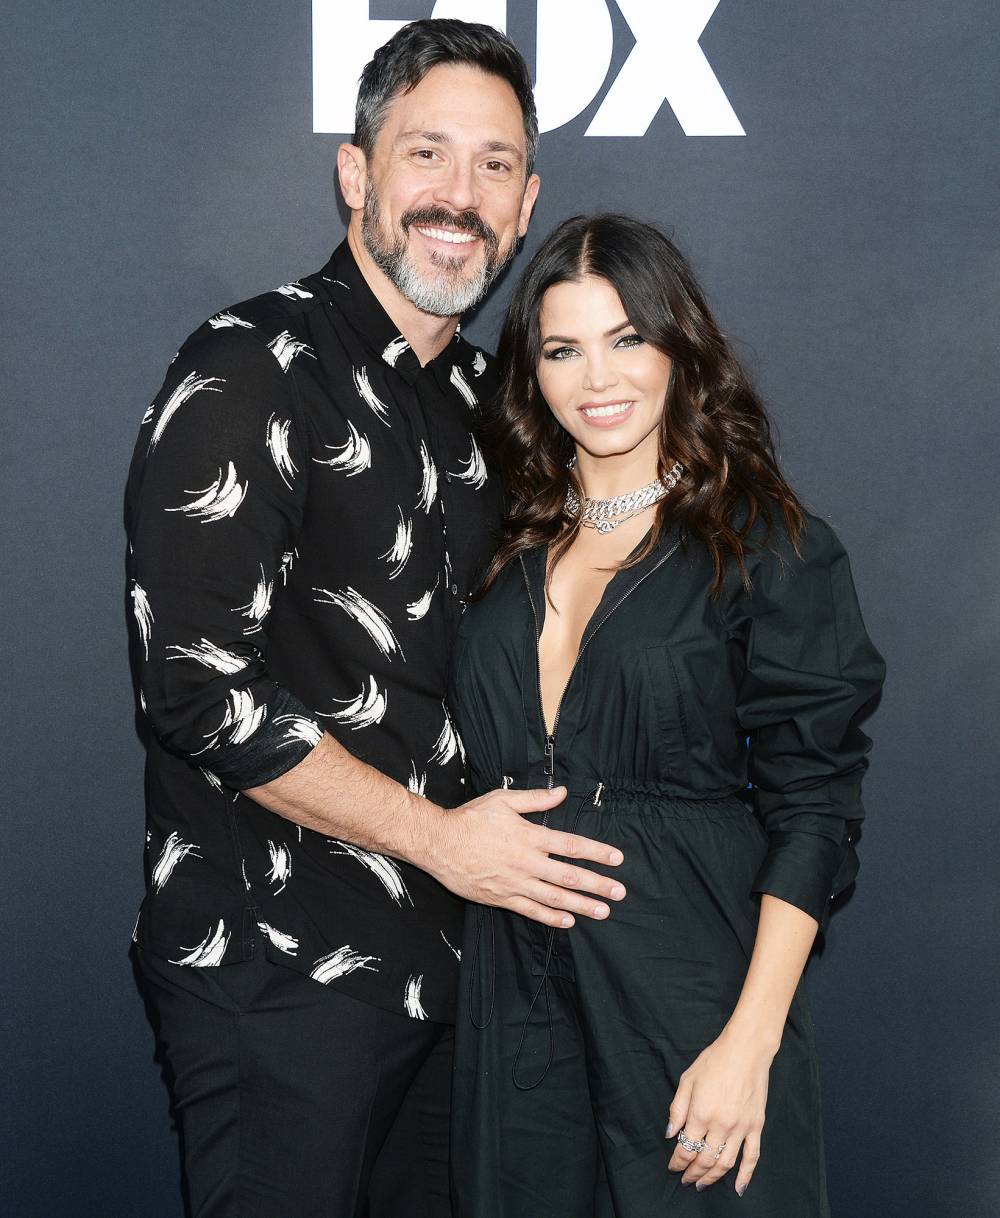 Pregnant Jenna Dewan and Steve Kazee Jenna Dewan Daughter Everly Cried When She Found Out Pregnancy News